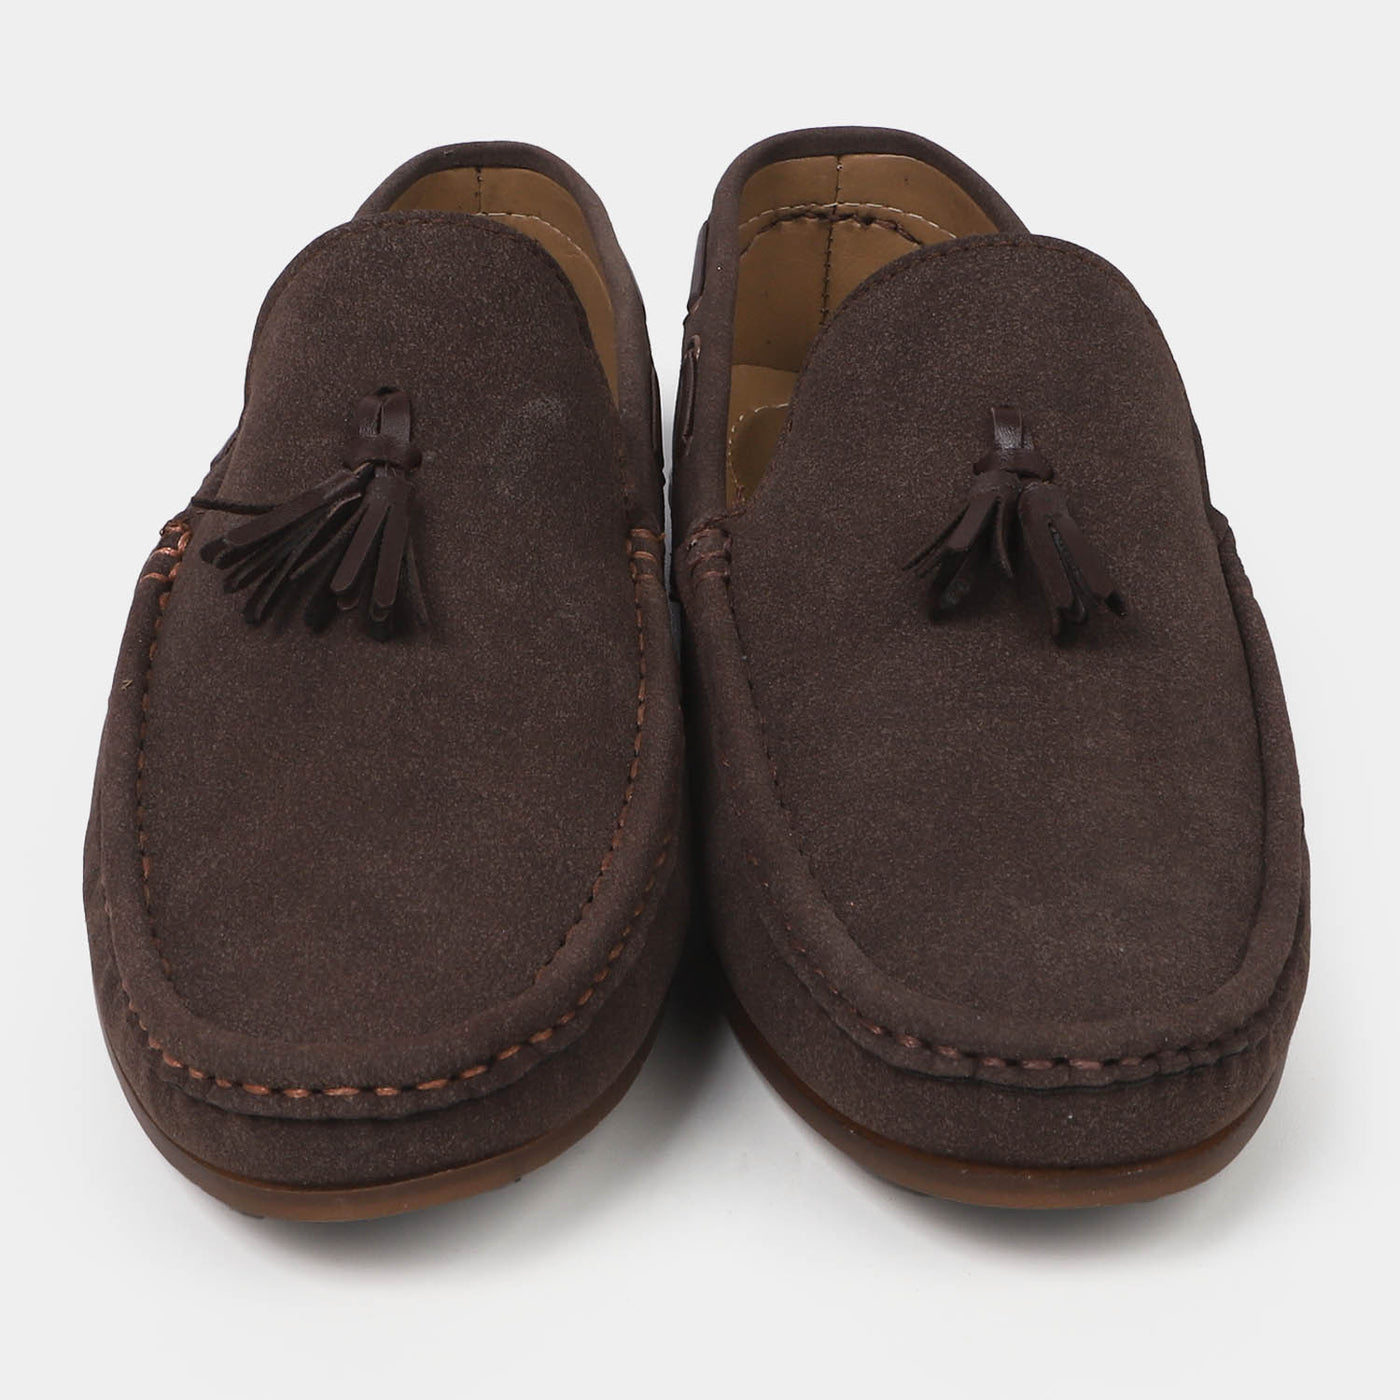 Teens Boys Loafer Shoes LF-4 - BROWN